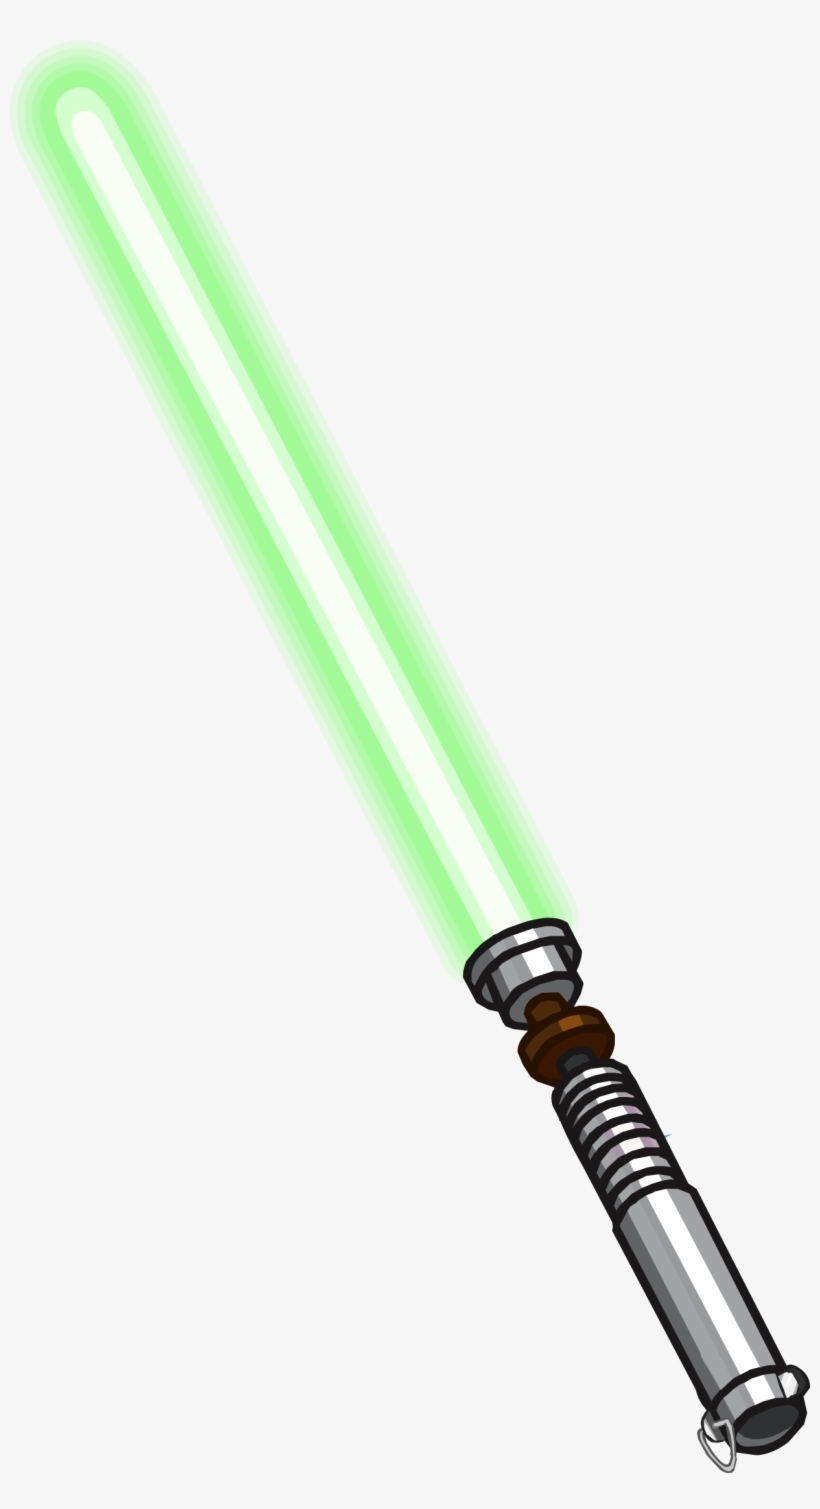 Image Green Clean Club Png Transparent - Light Saber Green Png, transparent png #129768